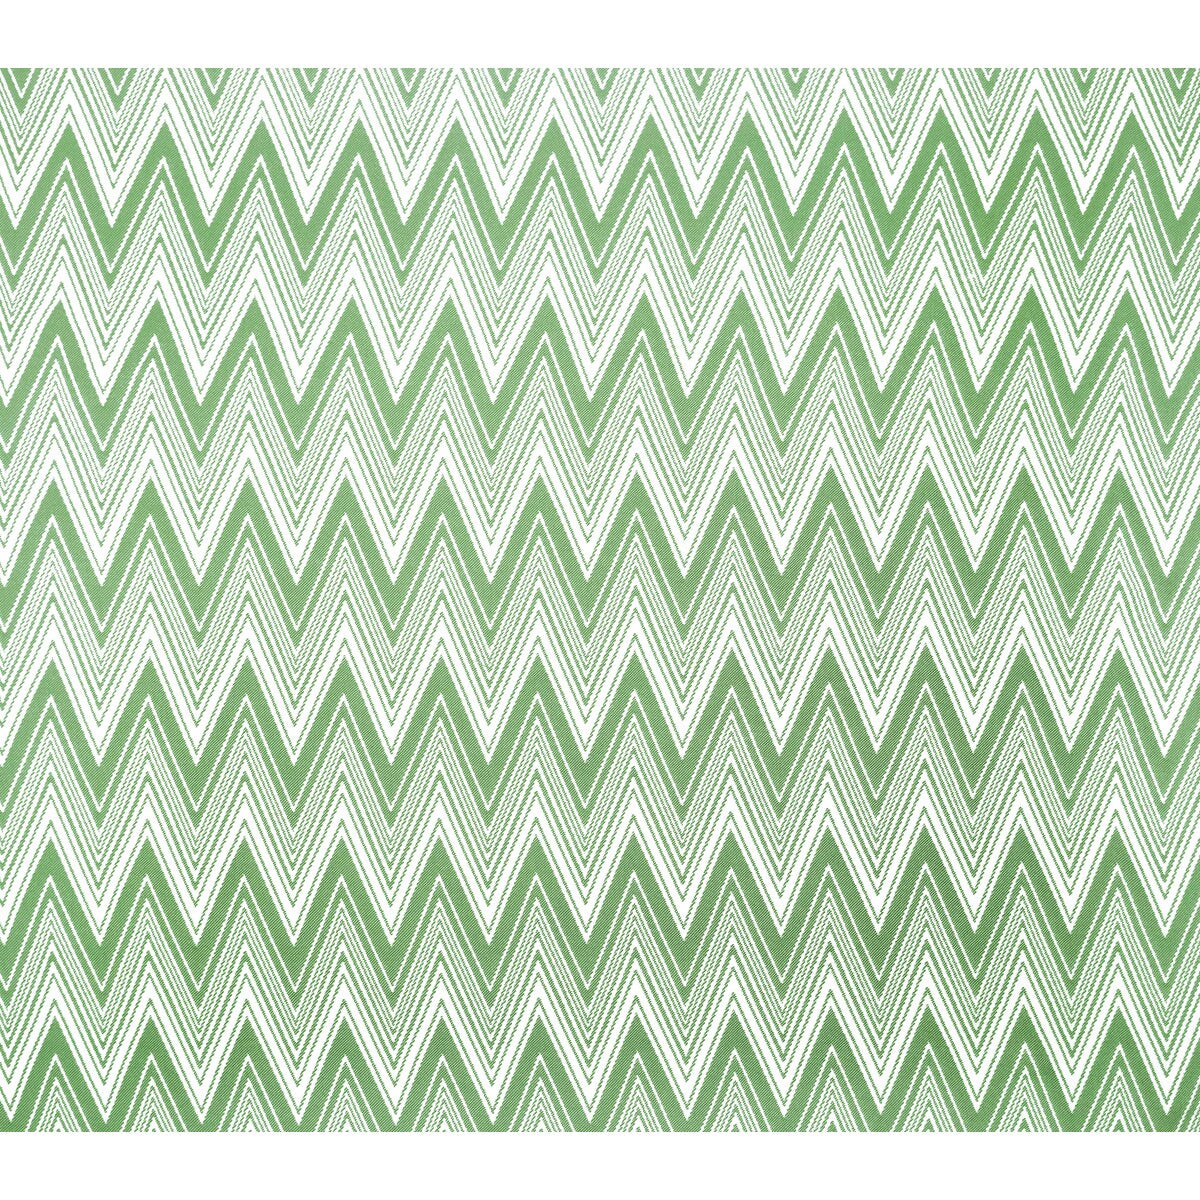 Grace fabric in verde color - pattern GDT5381.8.0 - by Gaston y Daniela in the Gaston Africalia collection